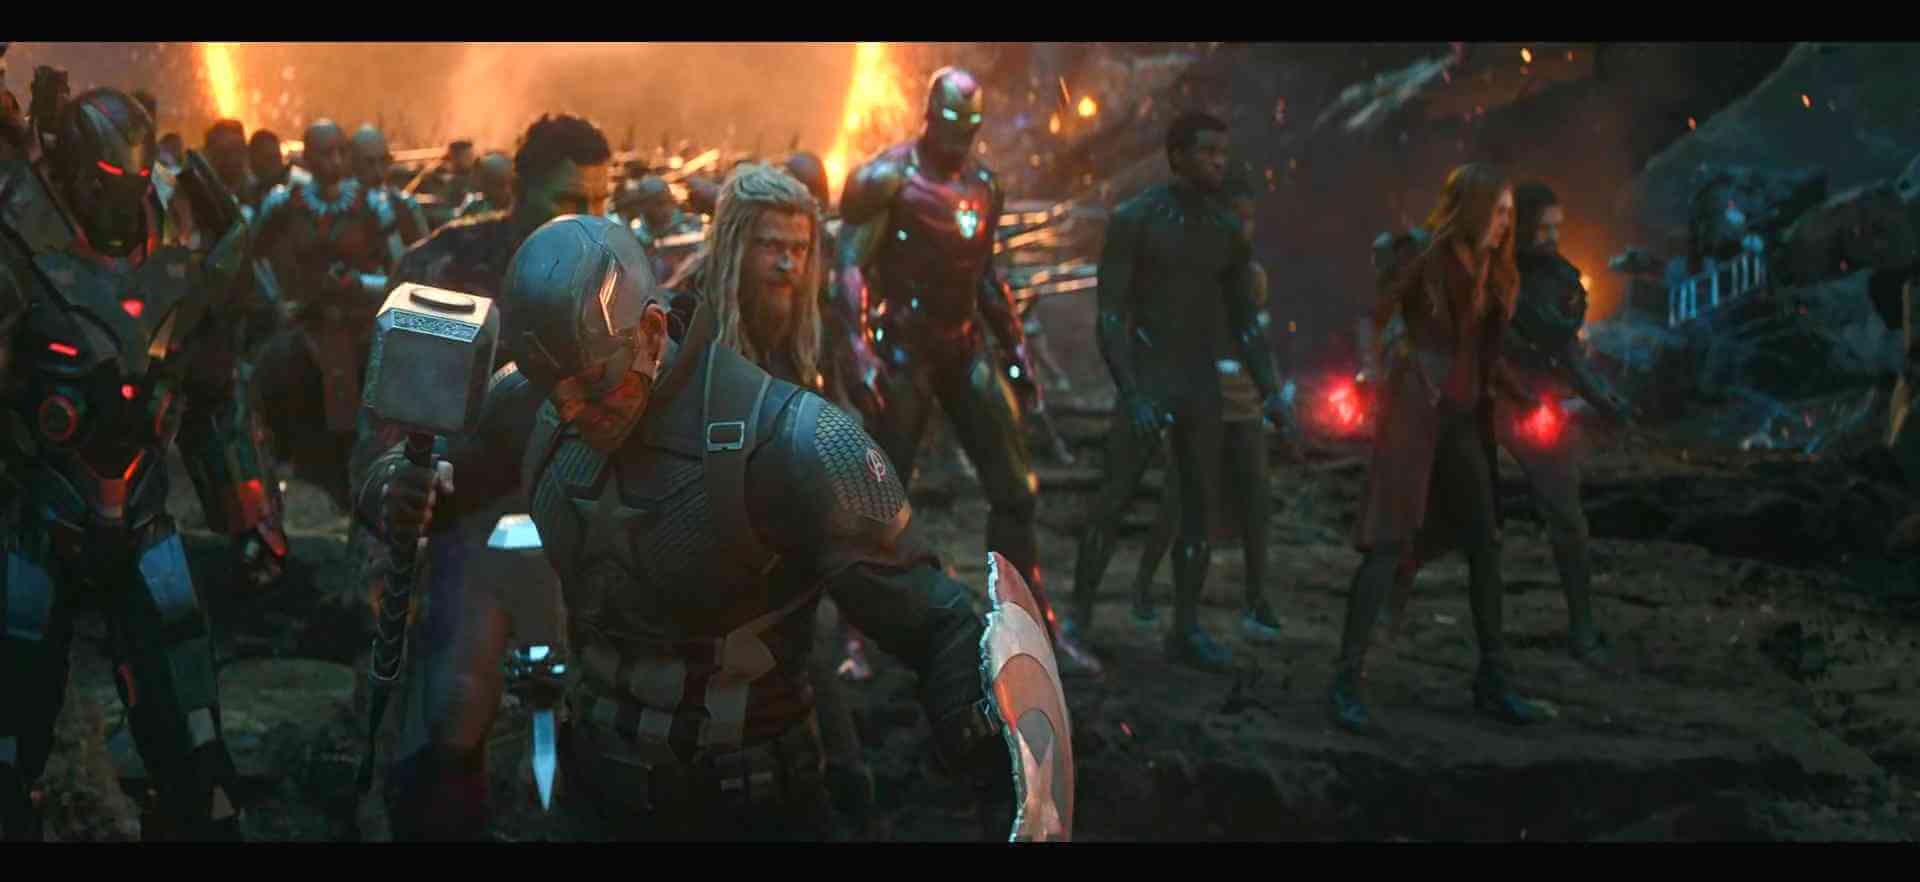 captain-america-thor-hammer-shield-combine-fighting-with-thanos-alongside-the-avengers